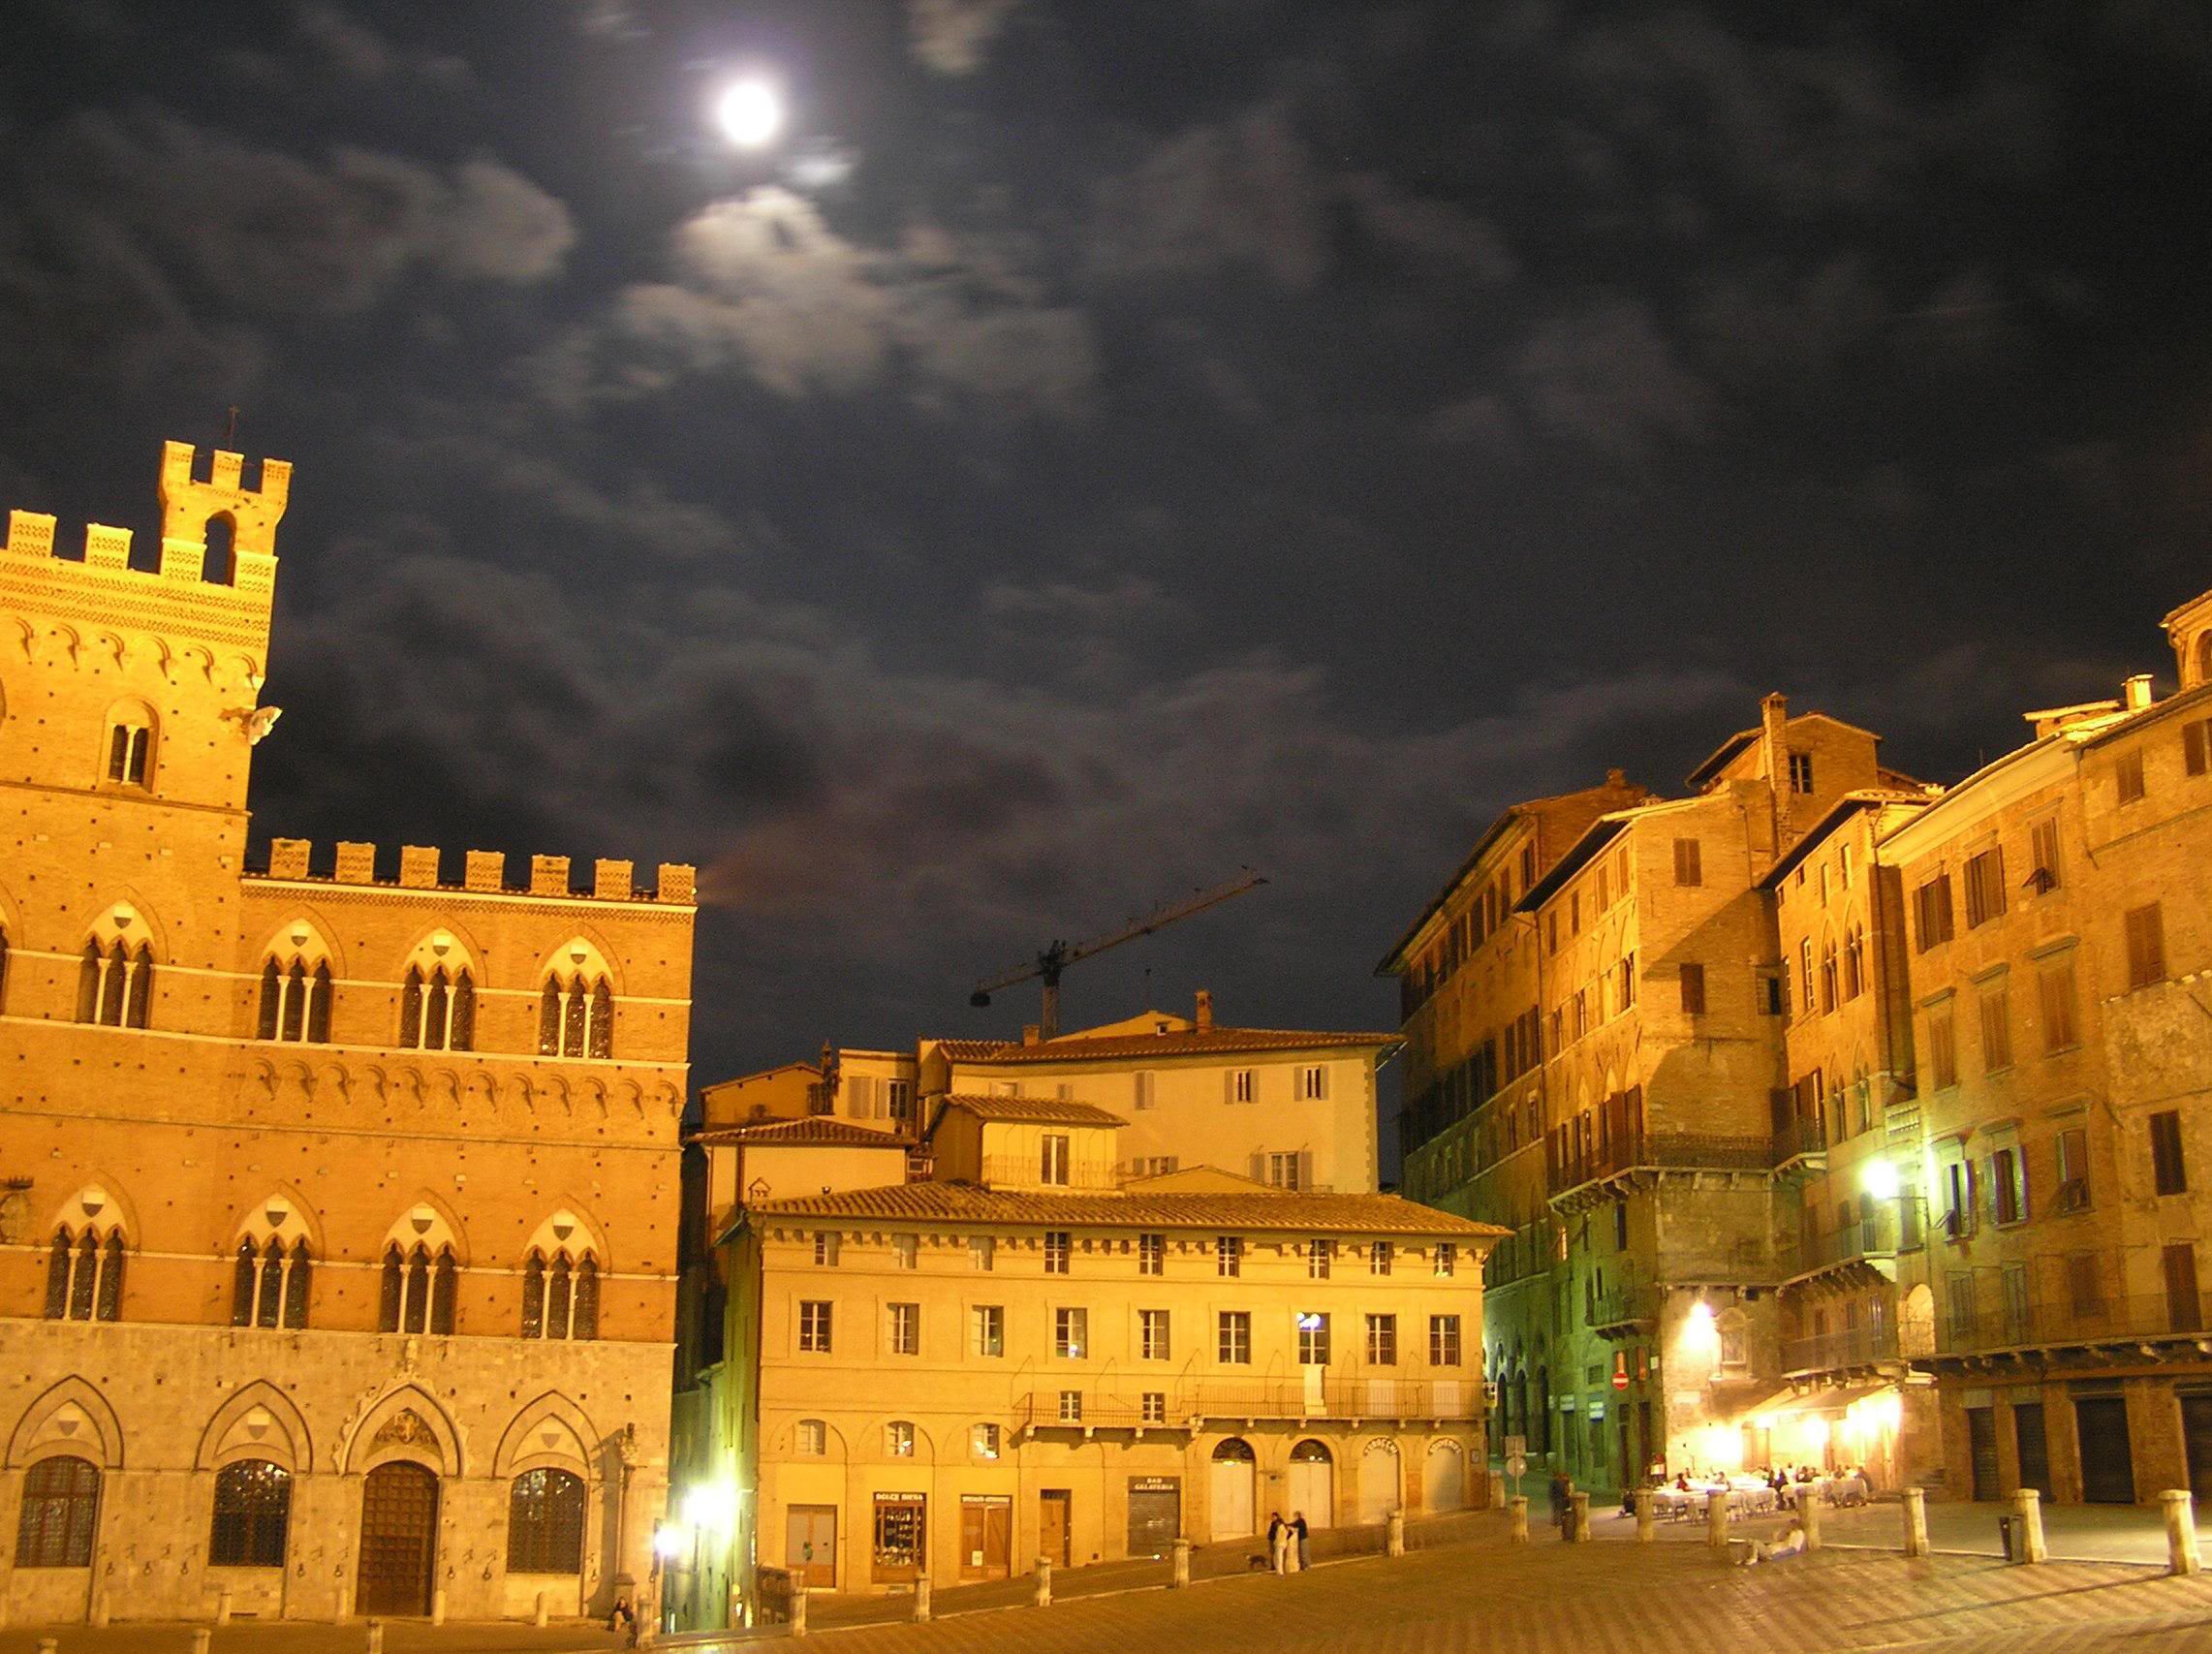 Siena Wallpaper Image Photos Pictures Background